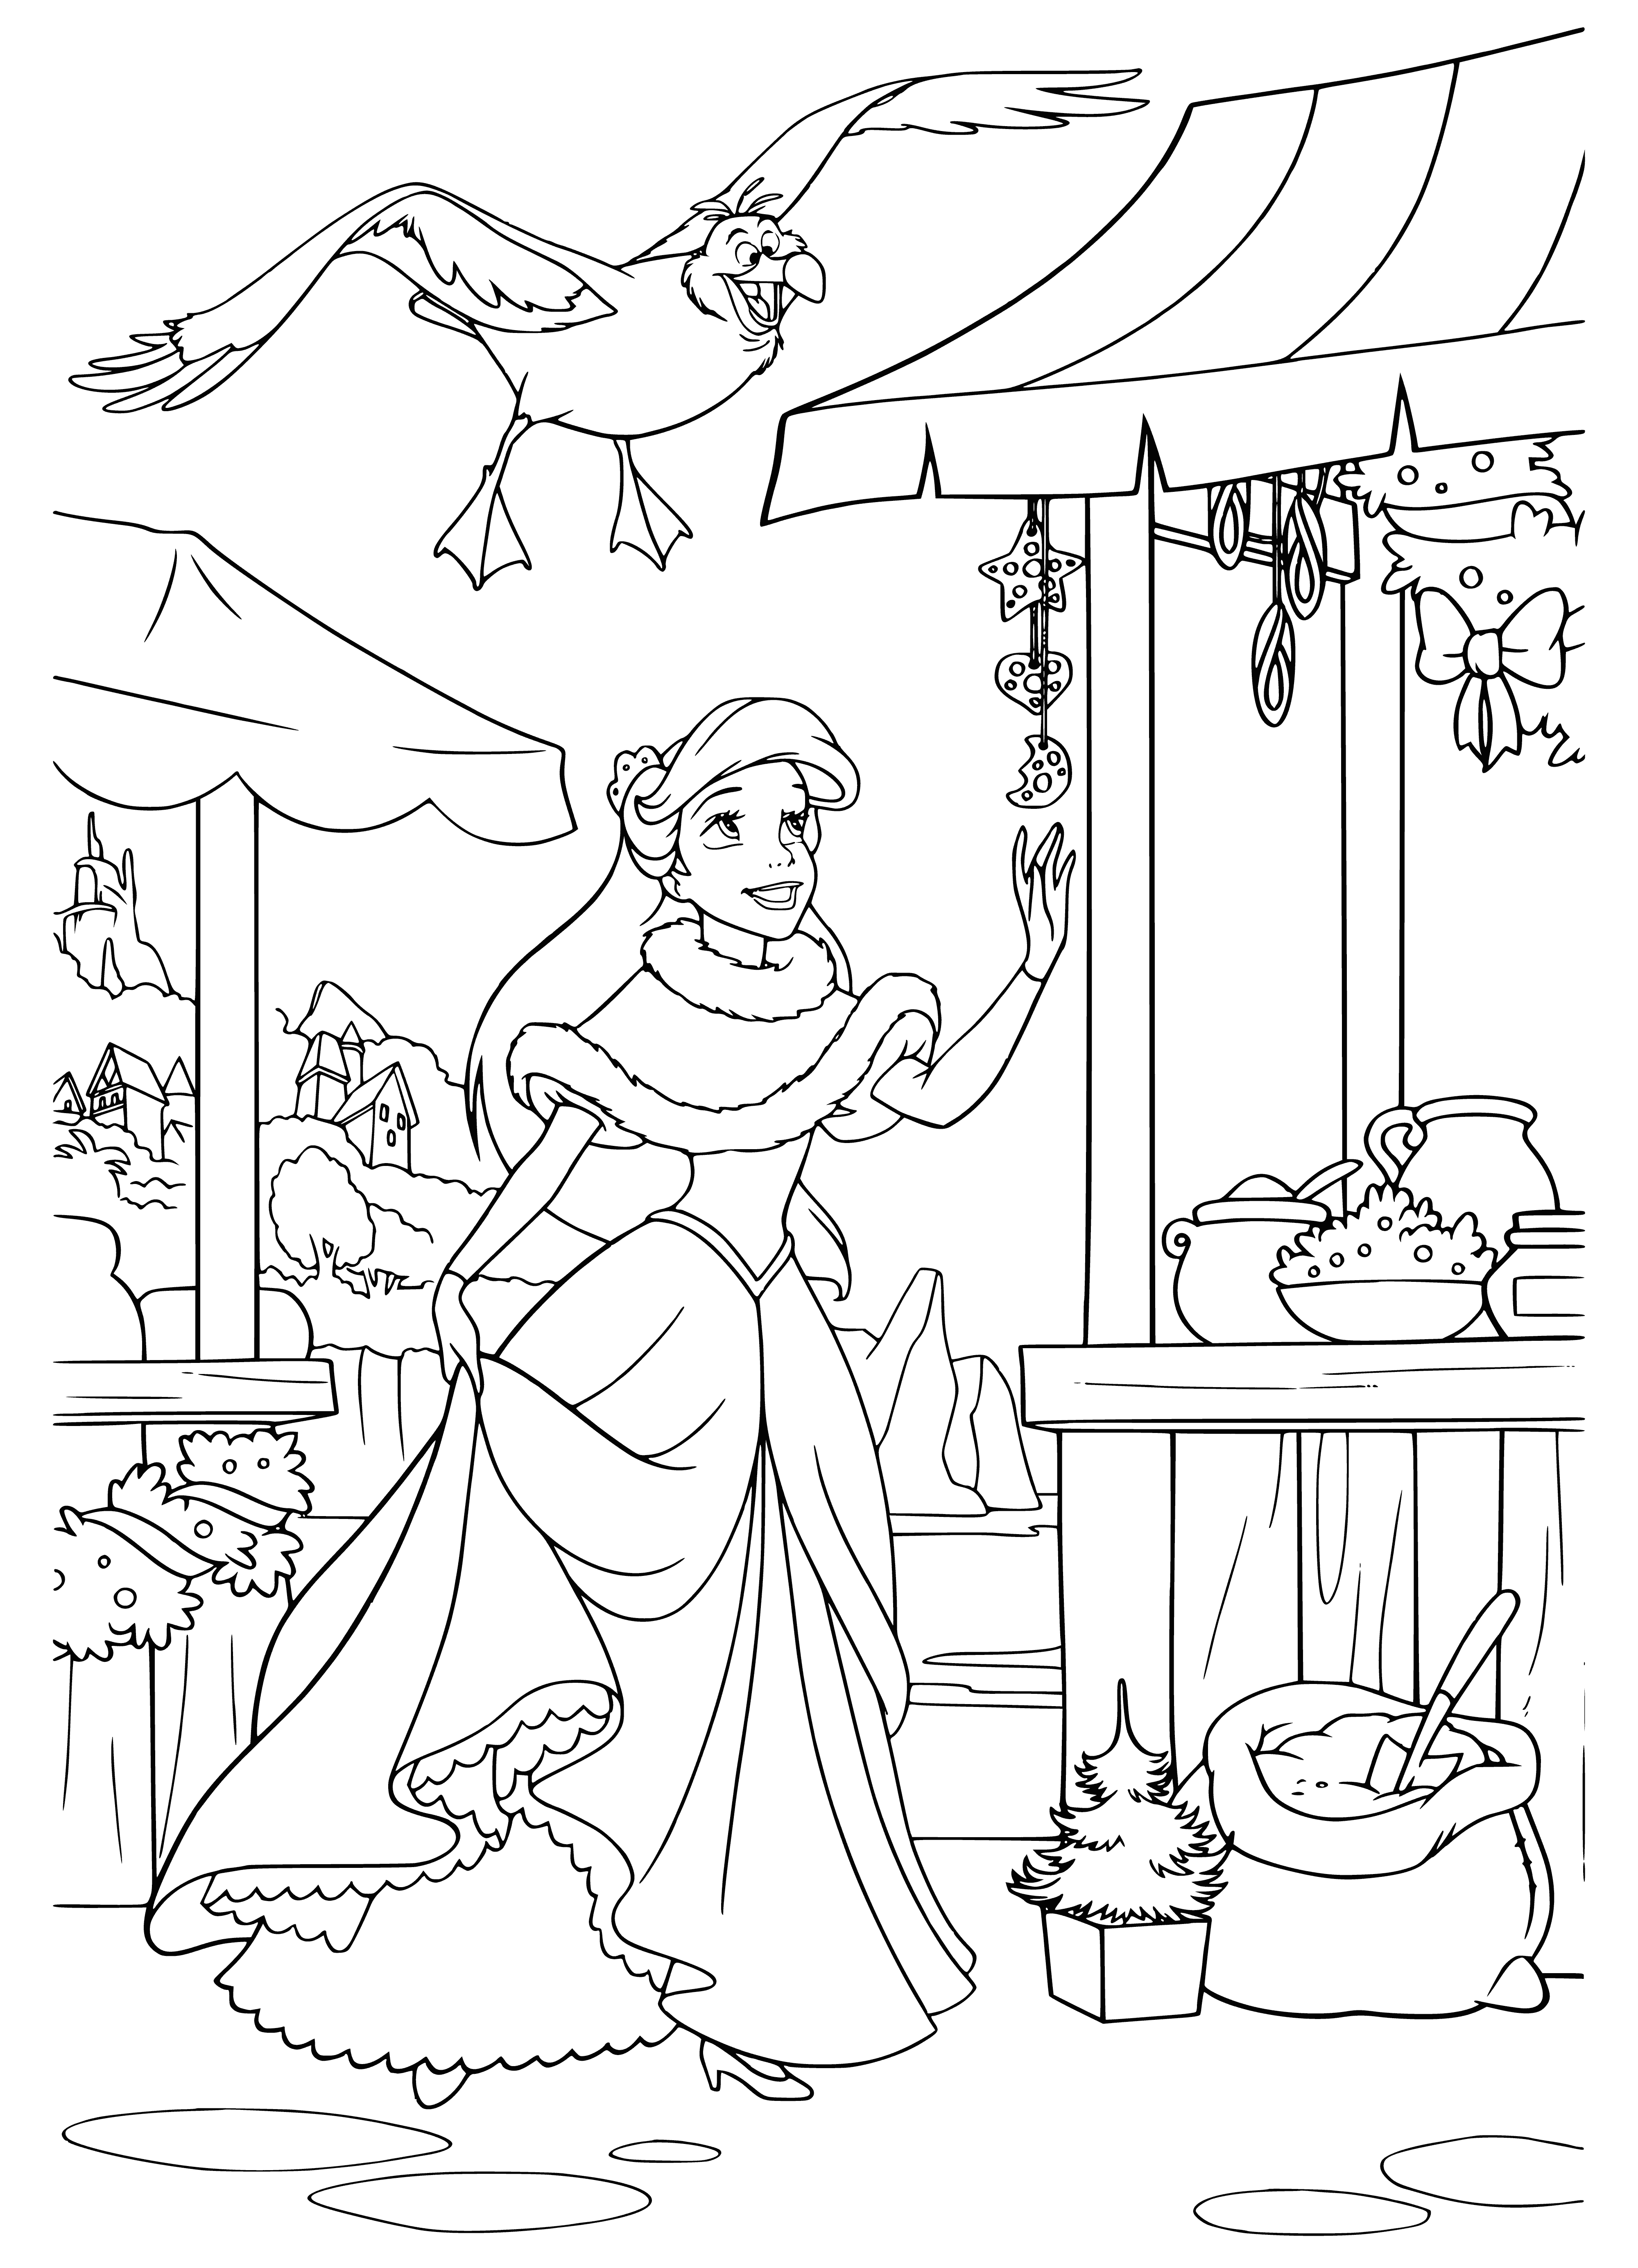 The little mermaid chooses new year decorations coloring page